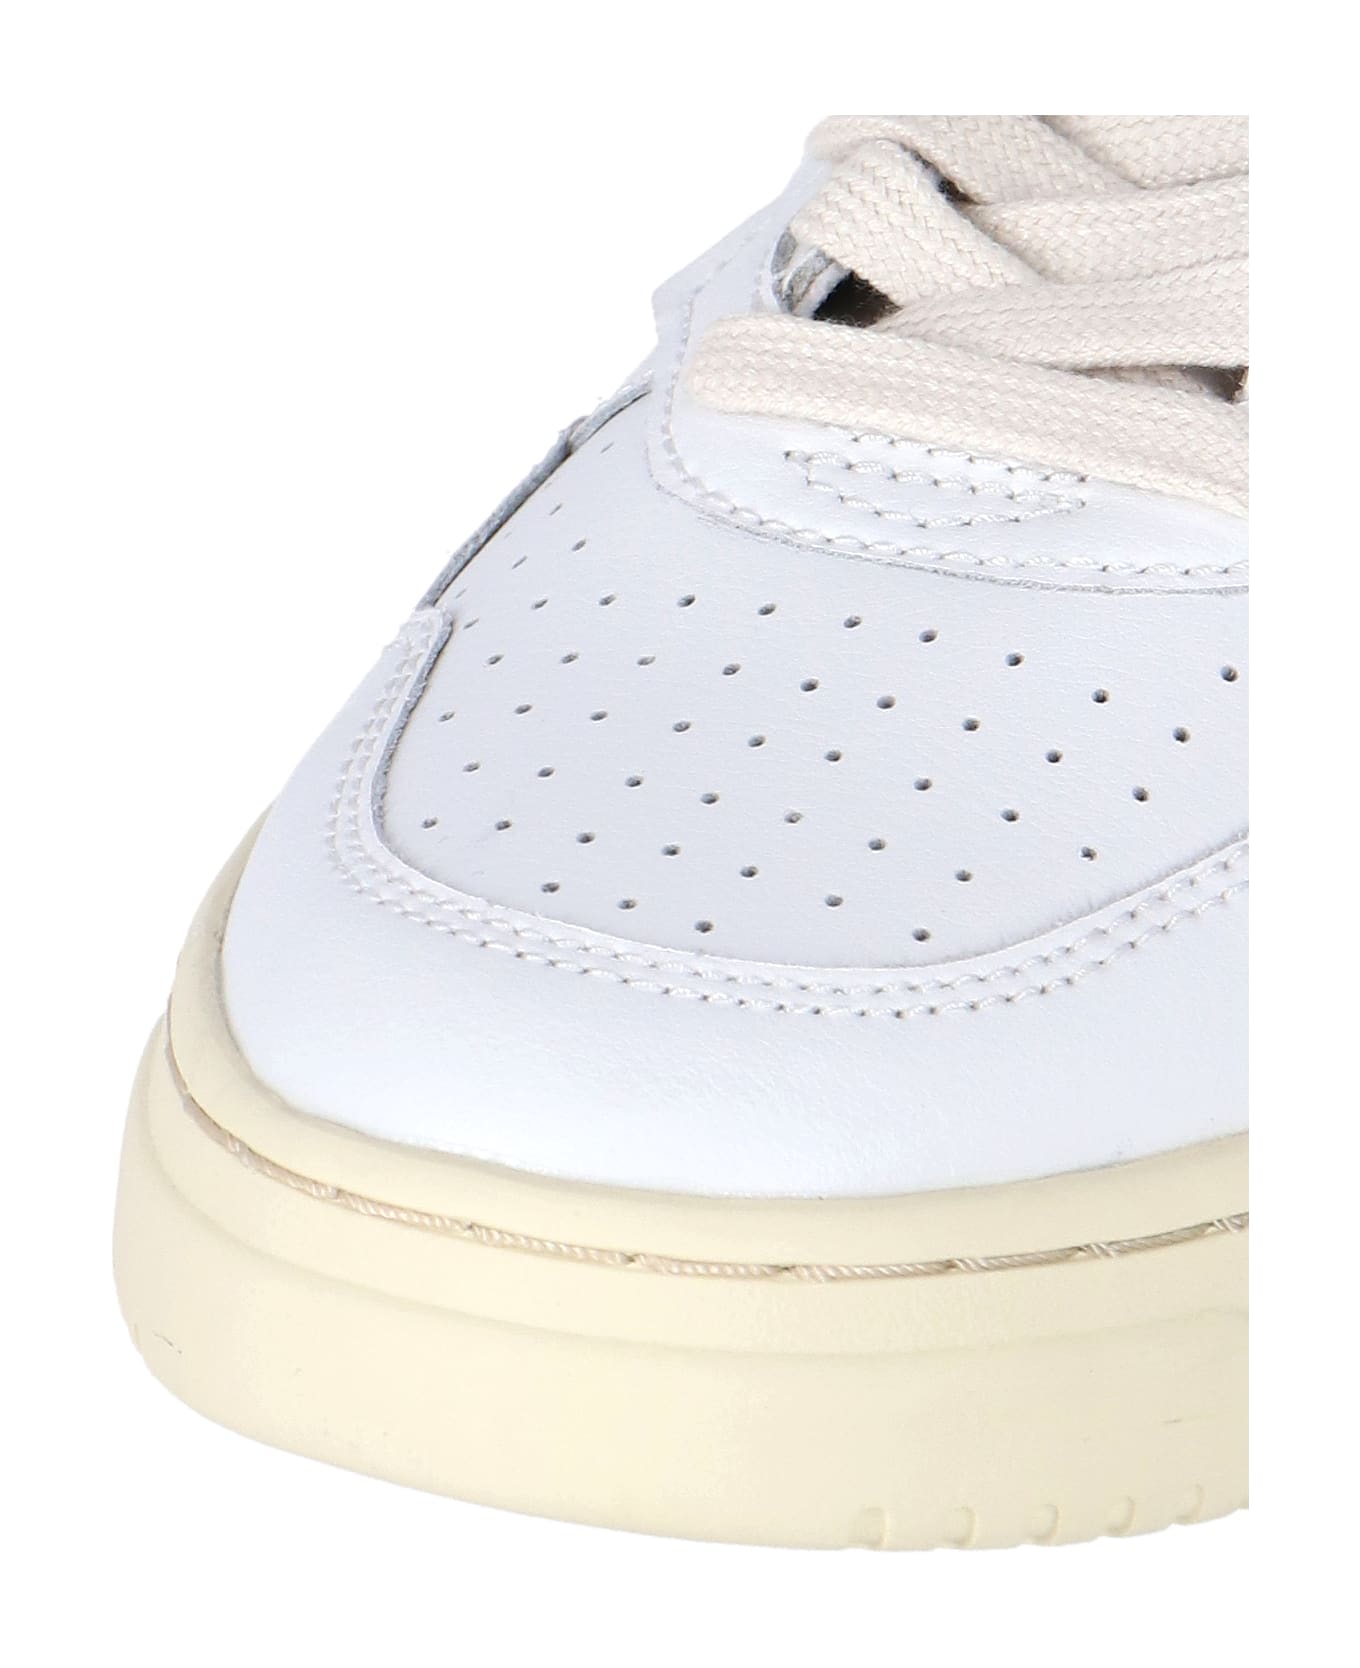 Autry 'medalist' Low Sneakers - Bianco/Rosso